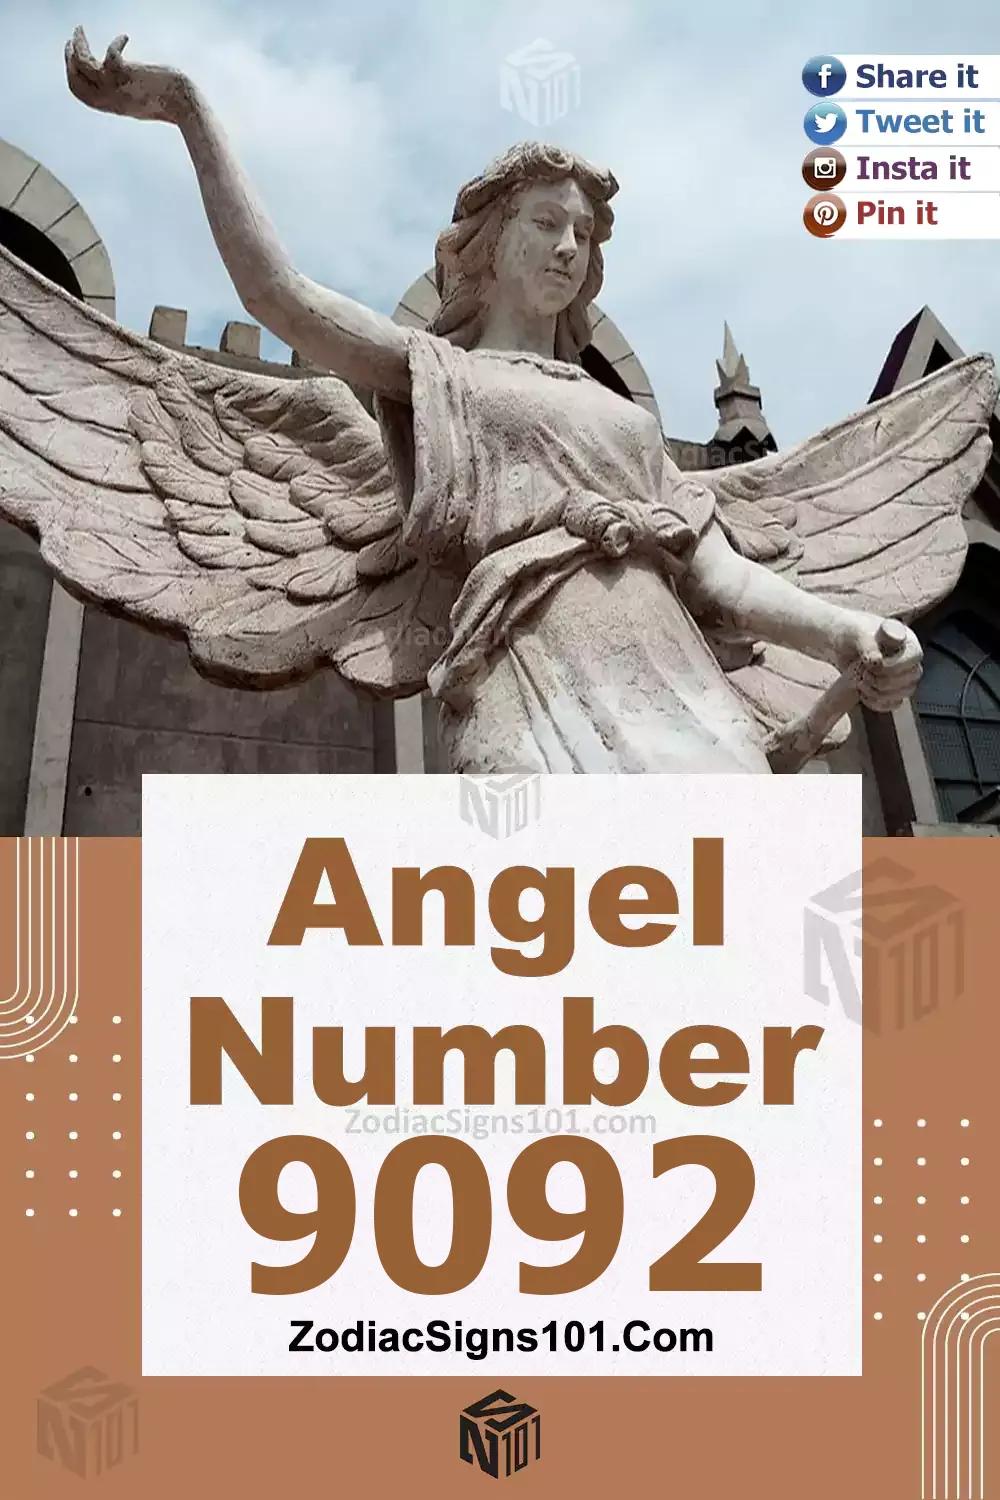 9092 Angel Number Meaning